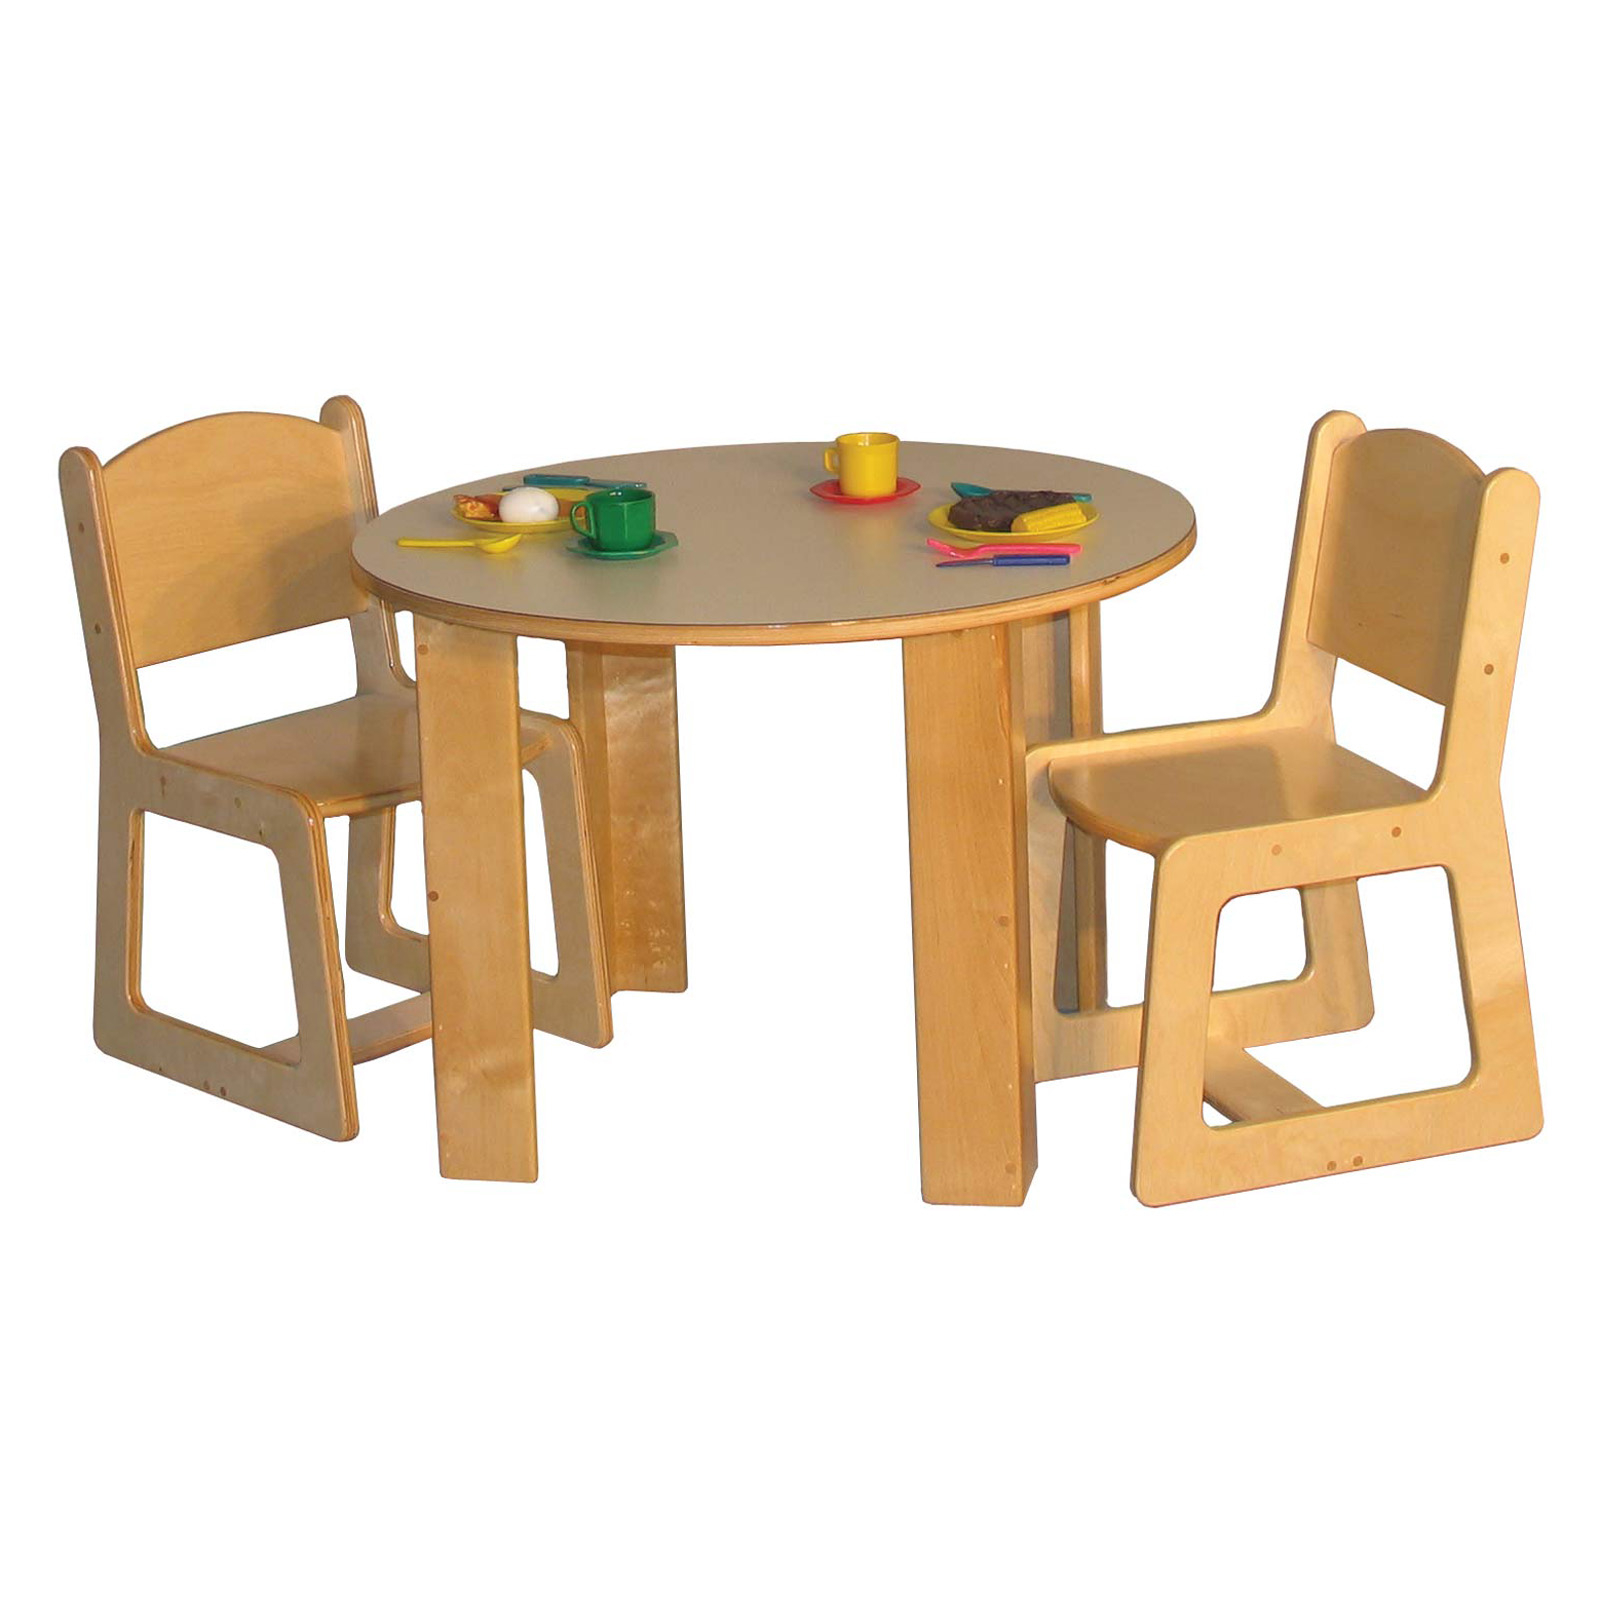 New Kids Table Chairs Set Game Children Round Small Table & Chairs Round UK 